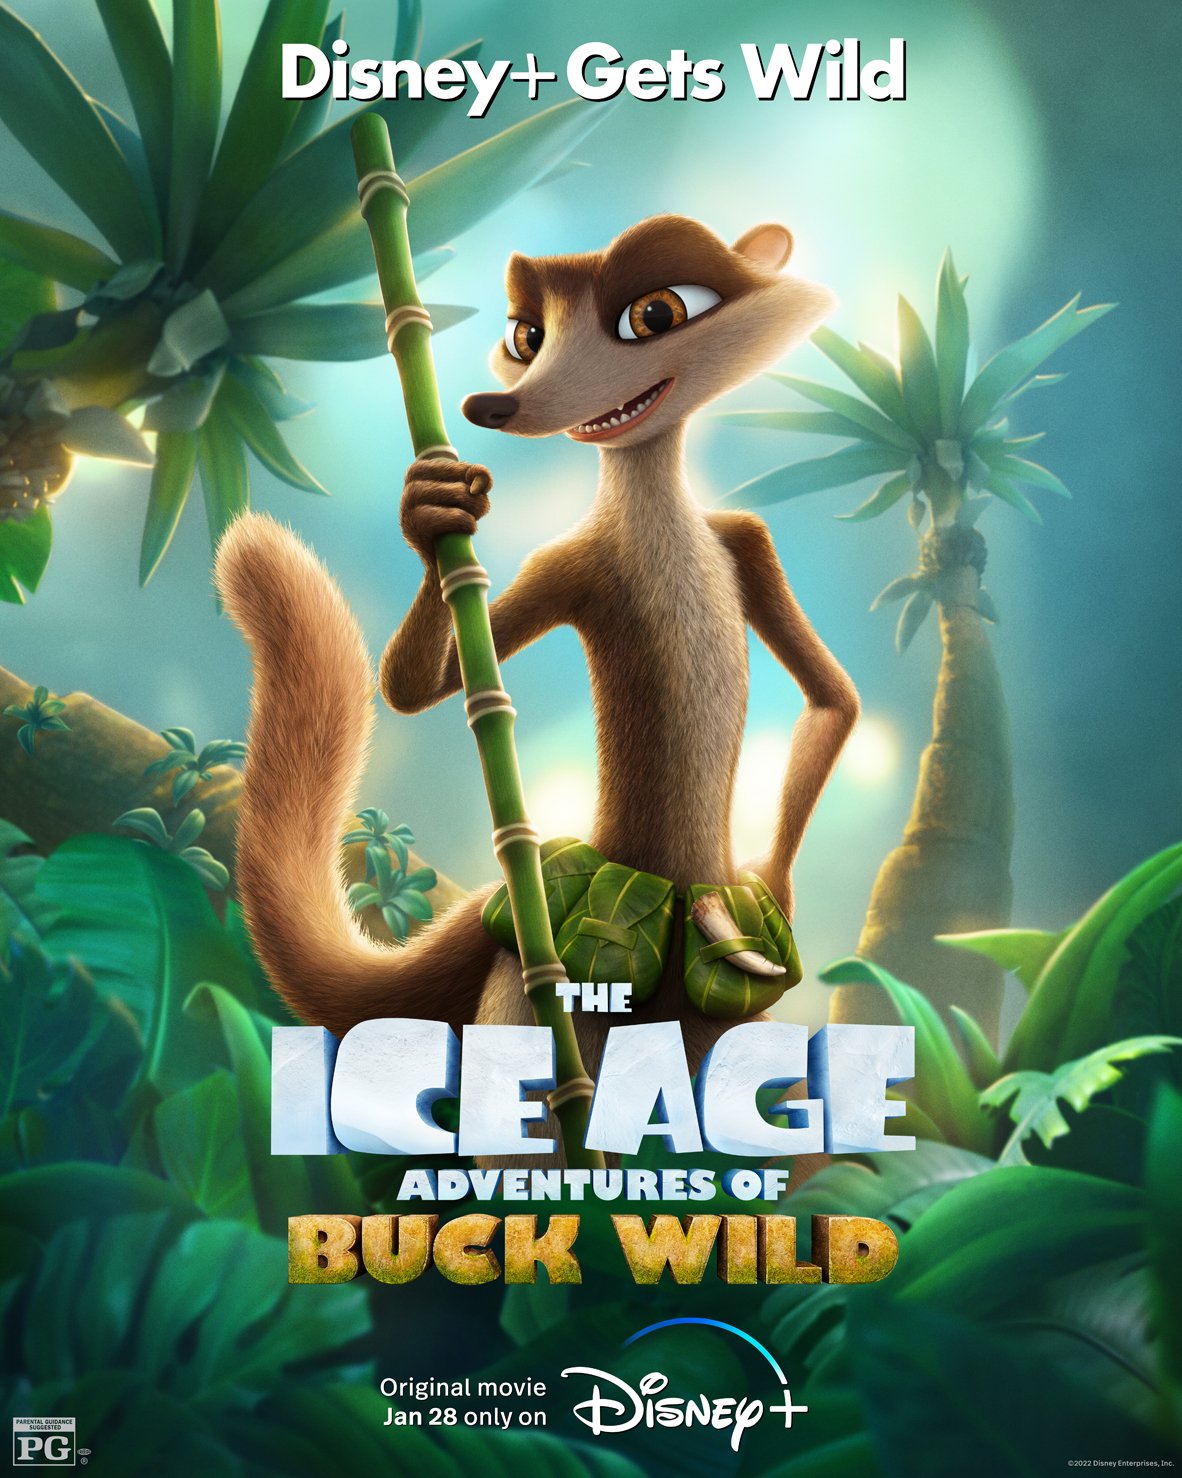 The Ice Age Adventures of Buck Wild came out